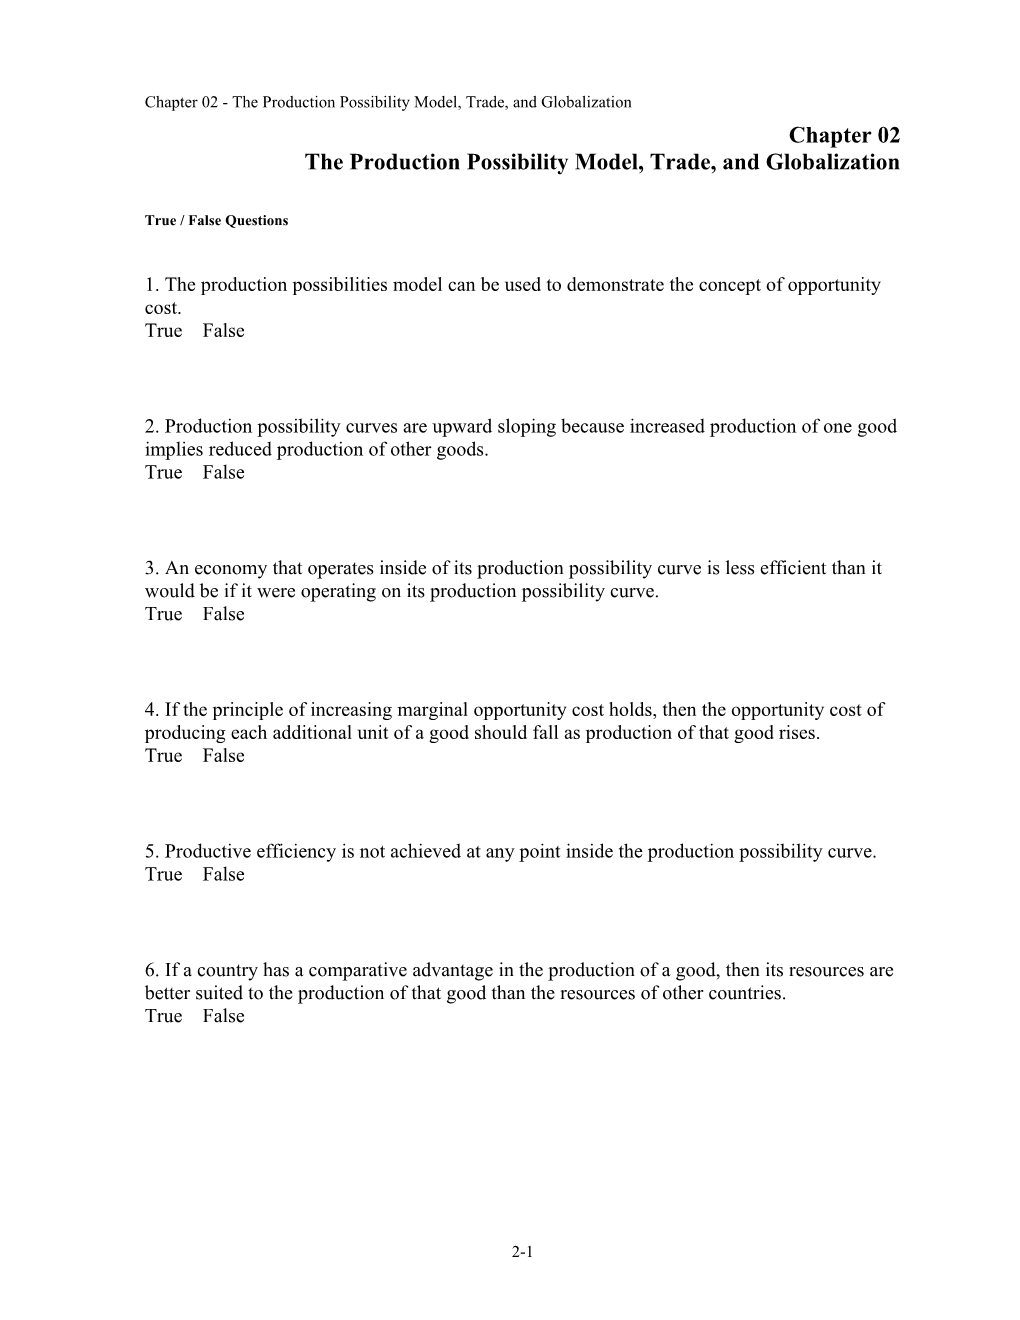 Chapter 02 the Production Possibility Model, Trade, and Globalization s1